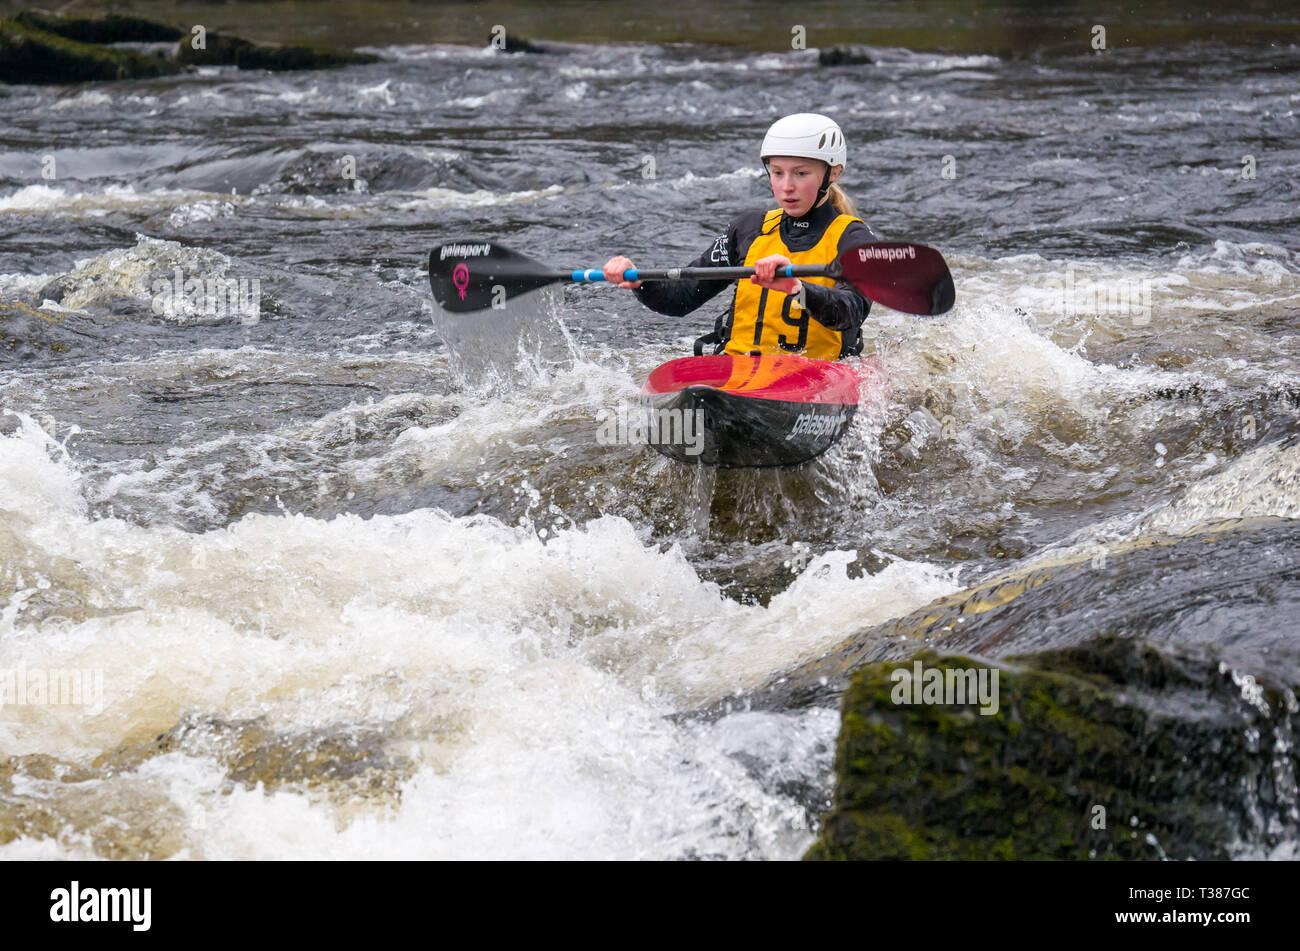 Grandtully, Perthshire, Scotland, United Kingdom, 7 April 2019. Grandtully Premier Canoe Slalom: Olivia Alderson from Holme Pierrepoint Canoe Club competes in the women’s premier kayak on Day 2 on the River Tay Stock Photo